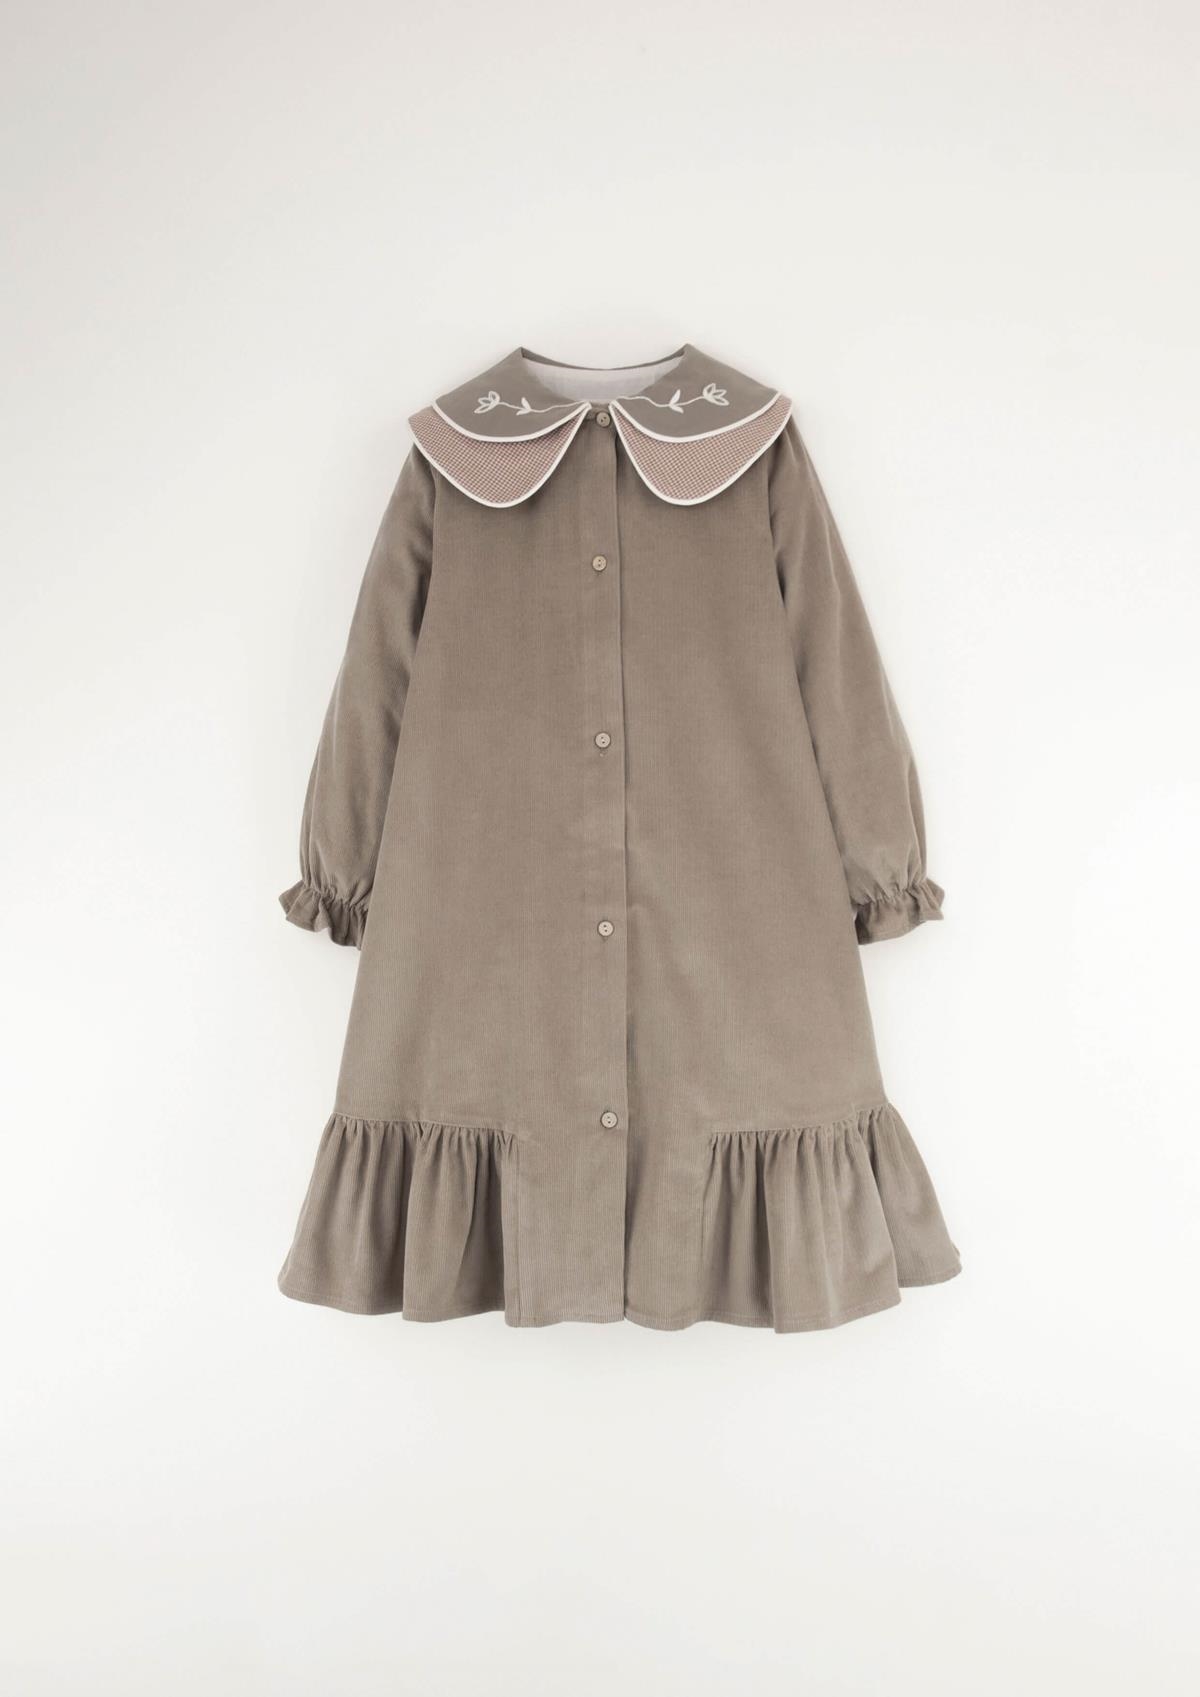 Mod.30.3 Taupe dress with double embroidered collar | AW23.24 Mod.30.3 Taupe dress with double embroidered collar